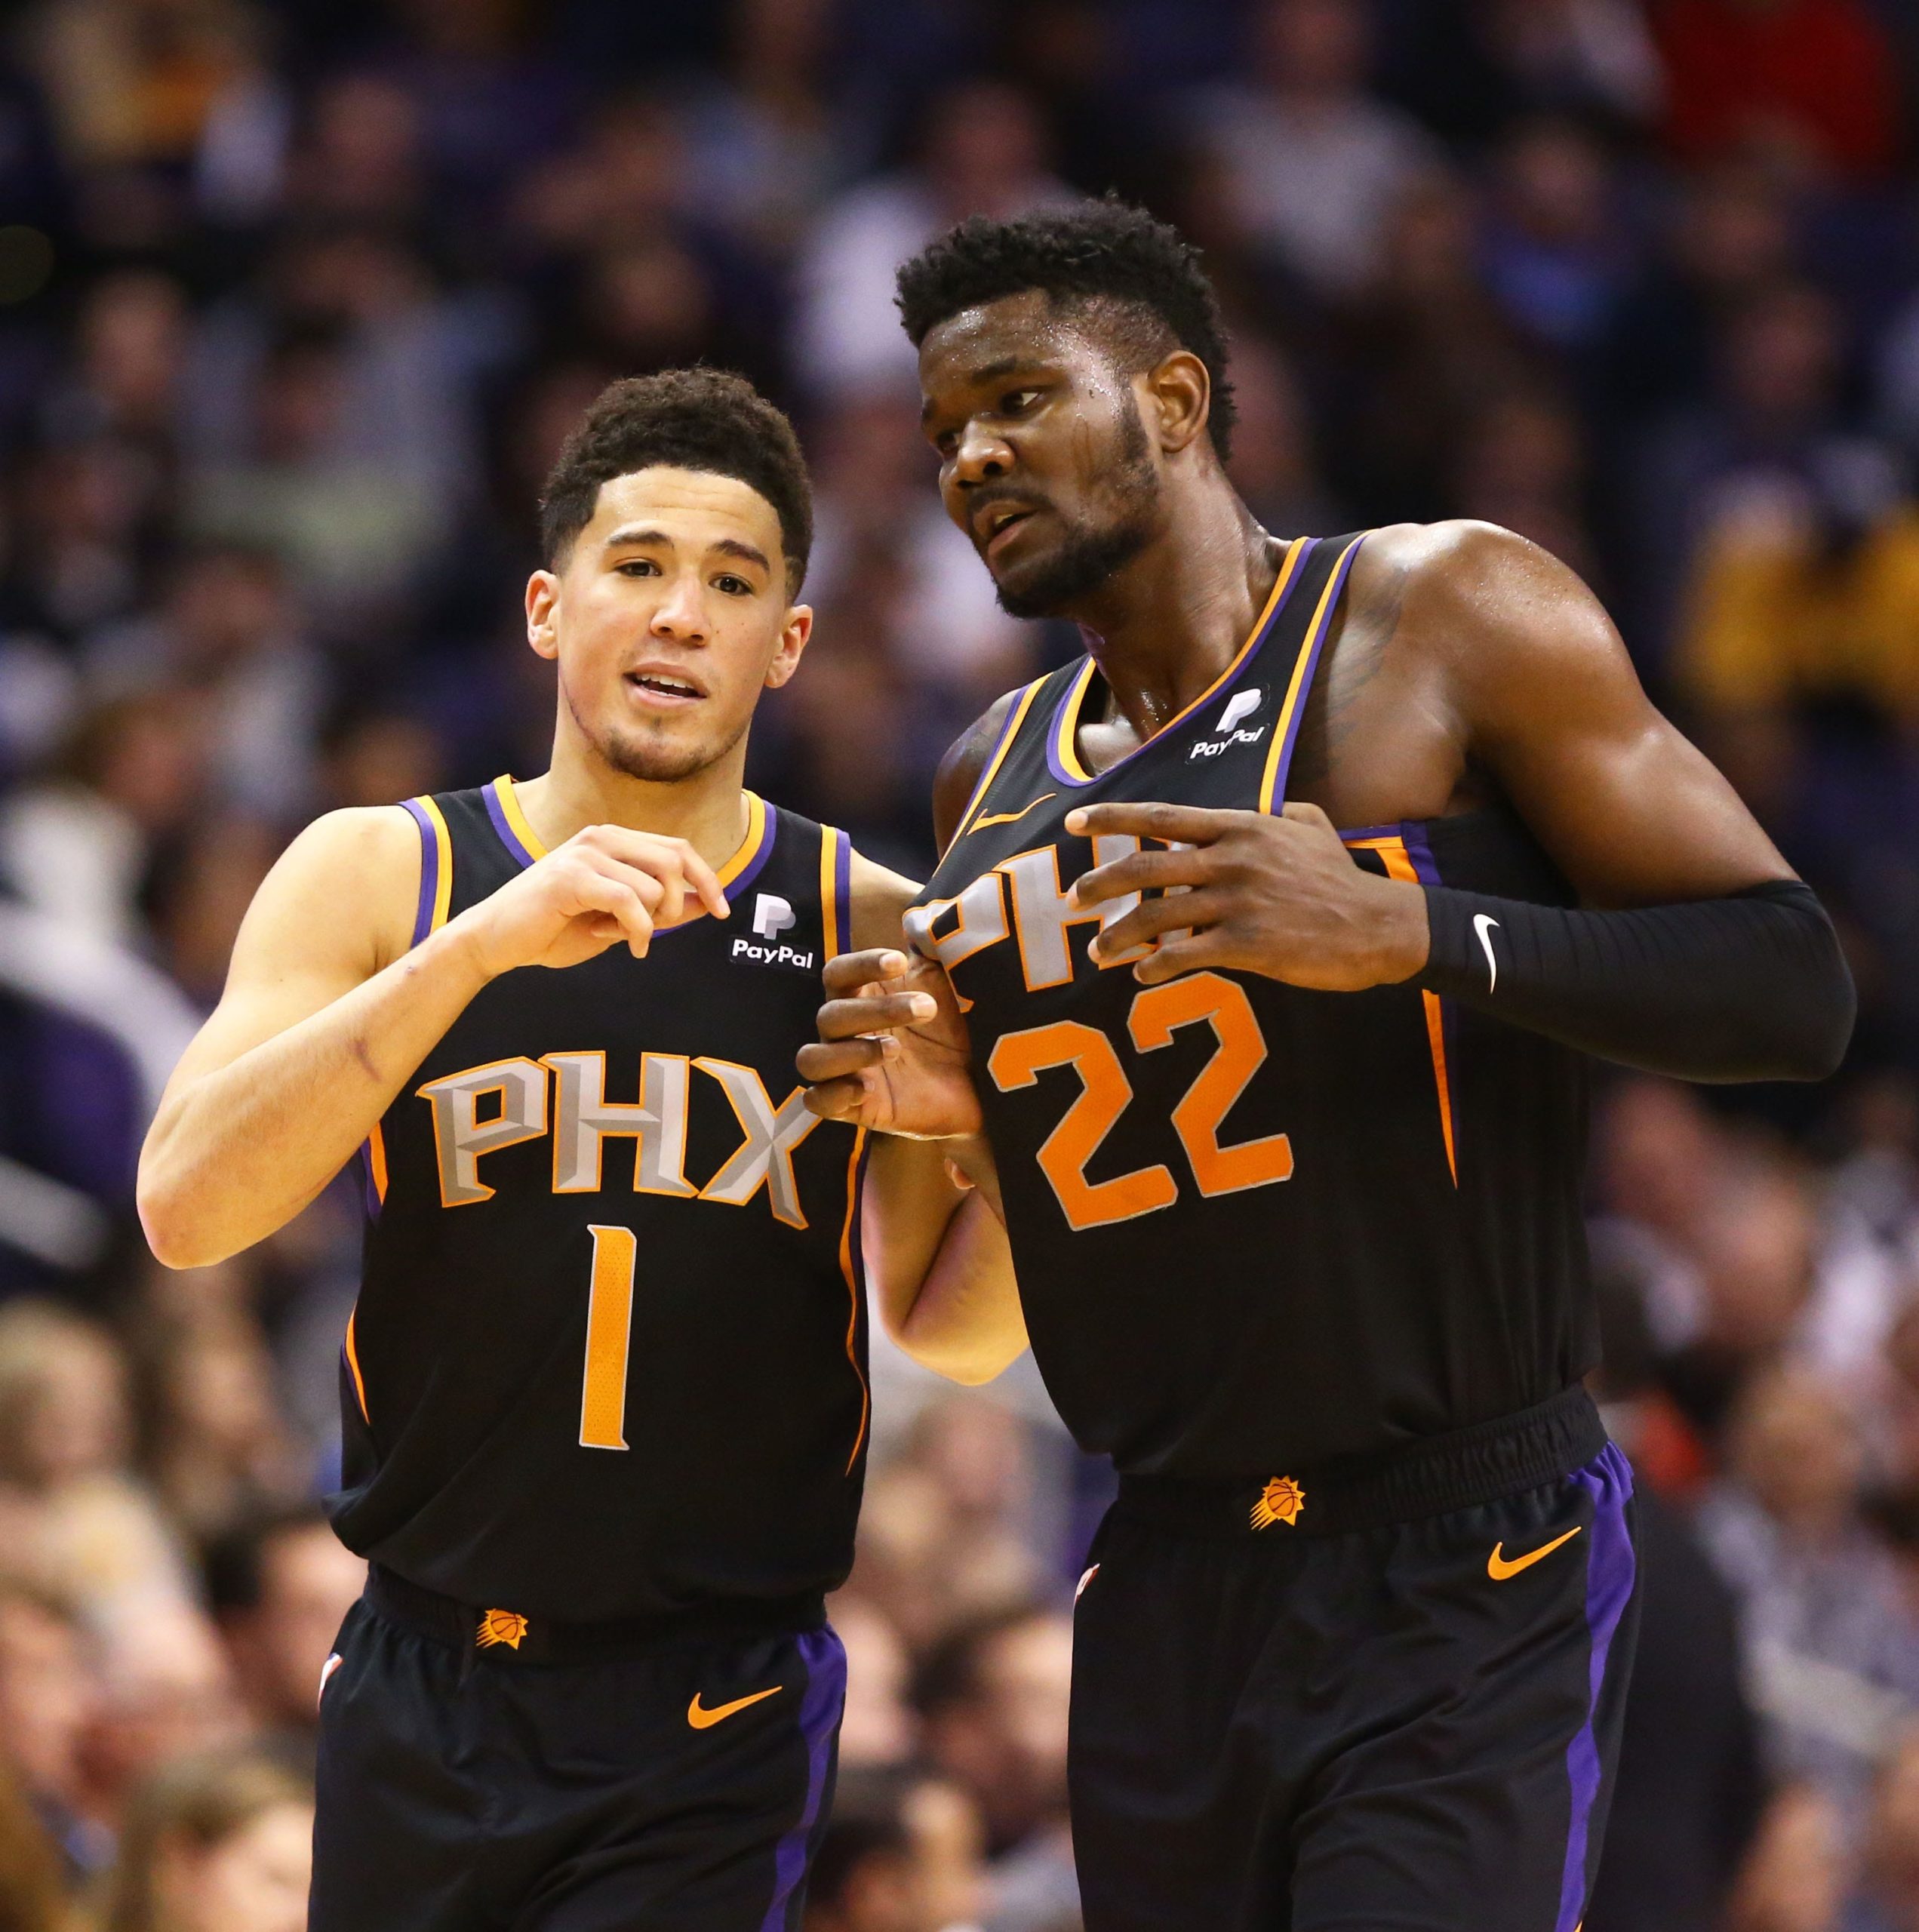 Ranking the Top 5 Duos in the Future in the NBA (24 and under)